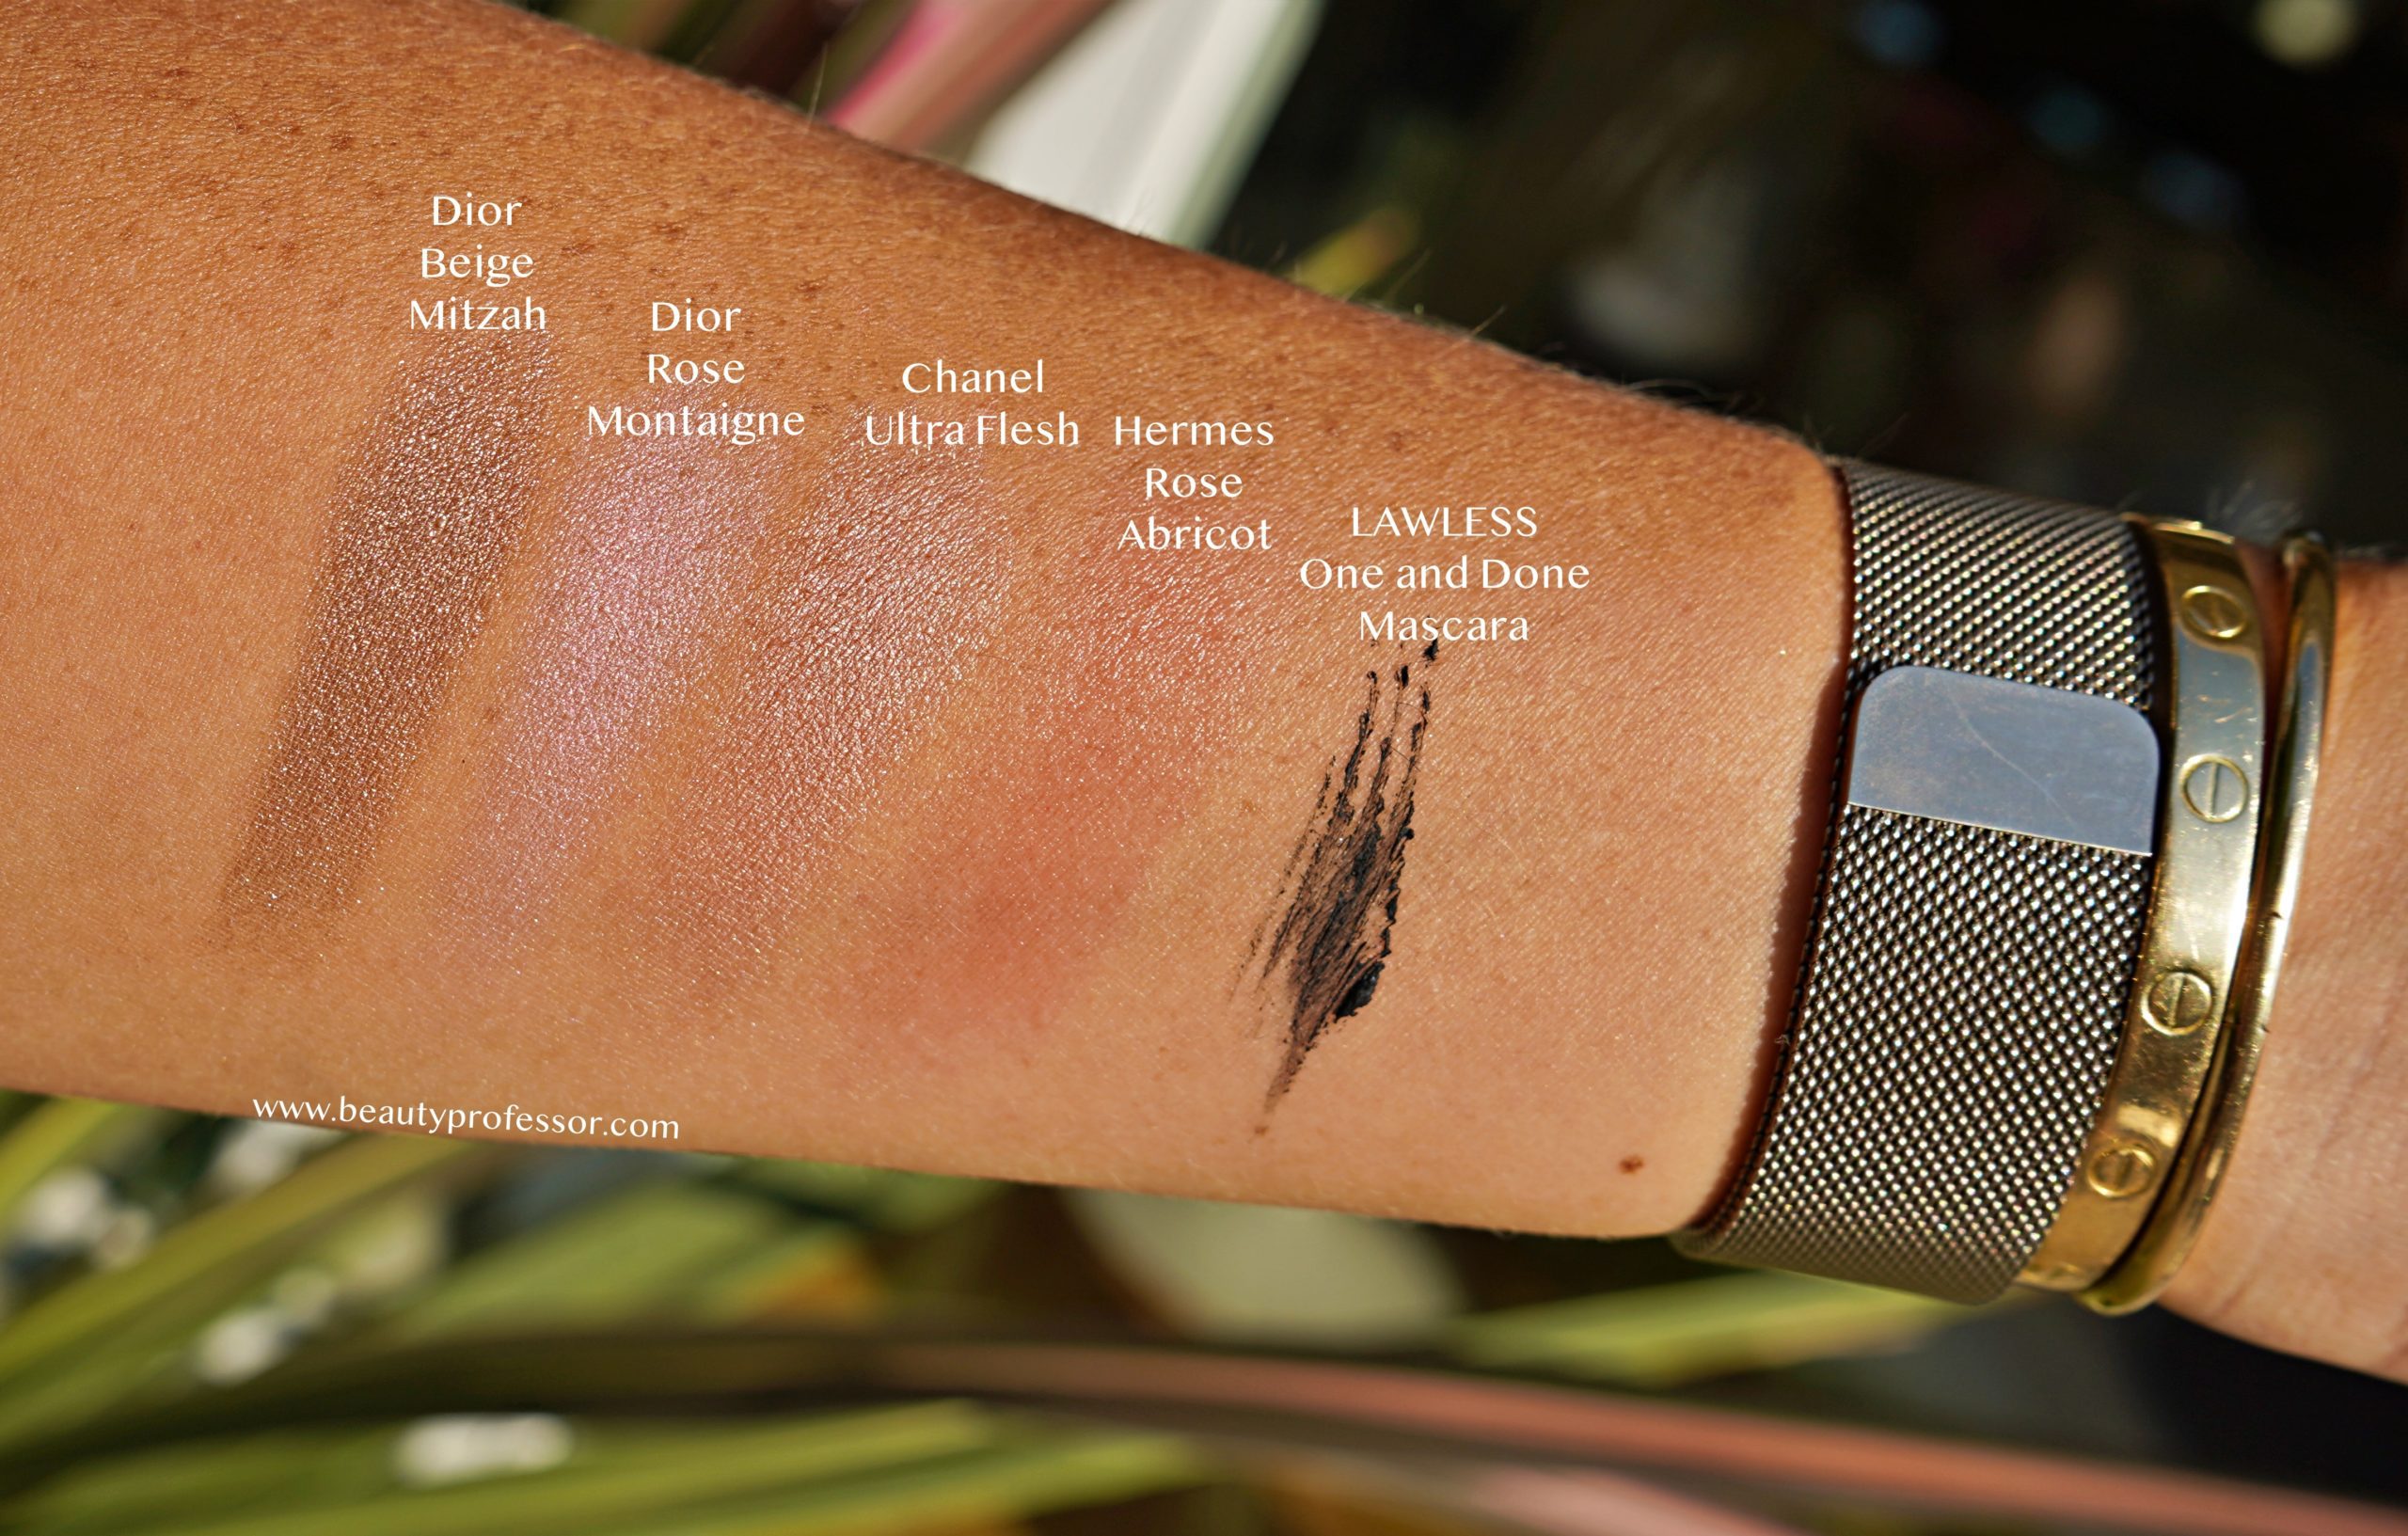 Swatches in direct sunlight